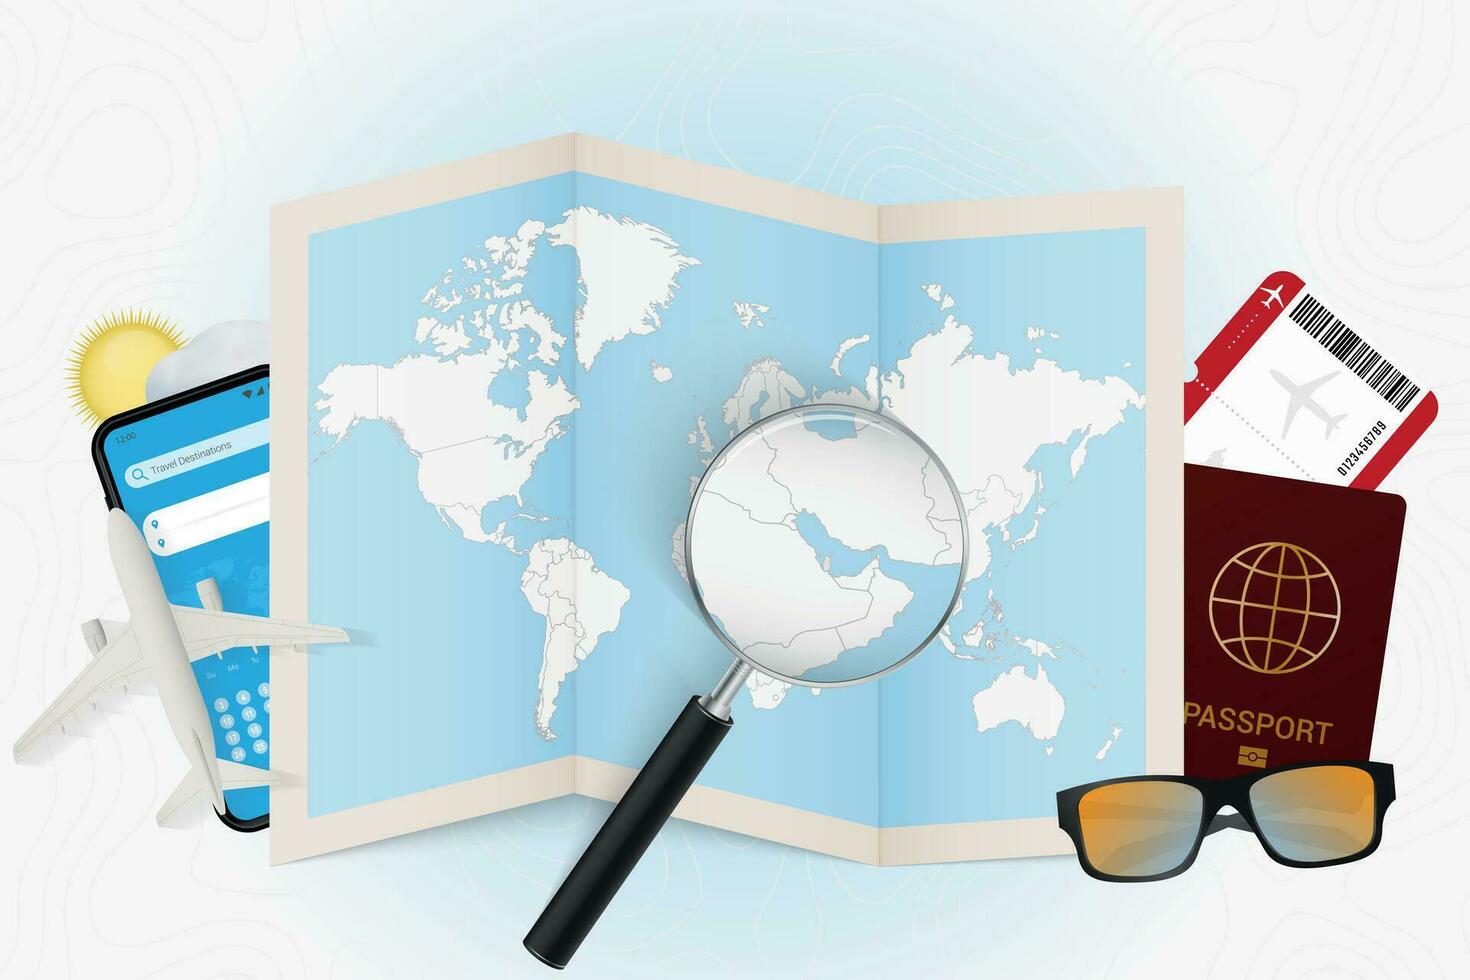 Travel destination Qatar, tourism mockup with travel equipment and world map with magnifying glass on a Qatar. vector